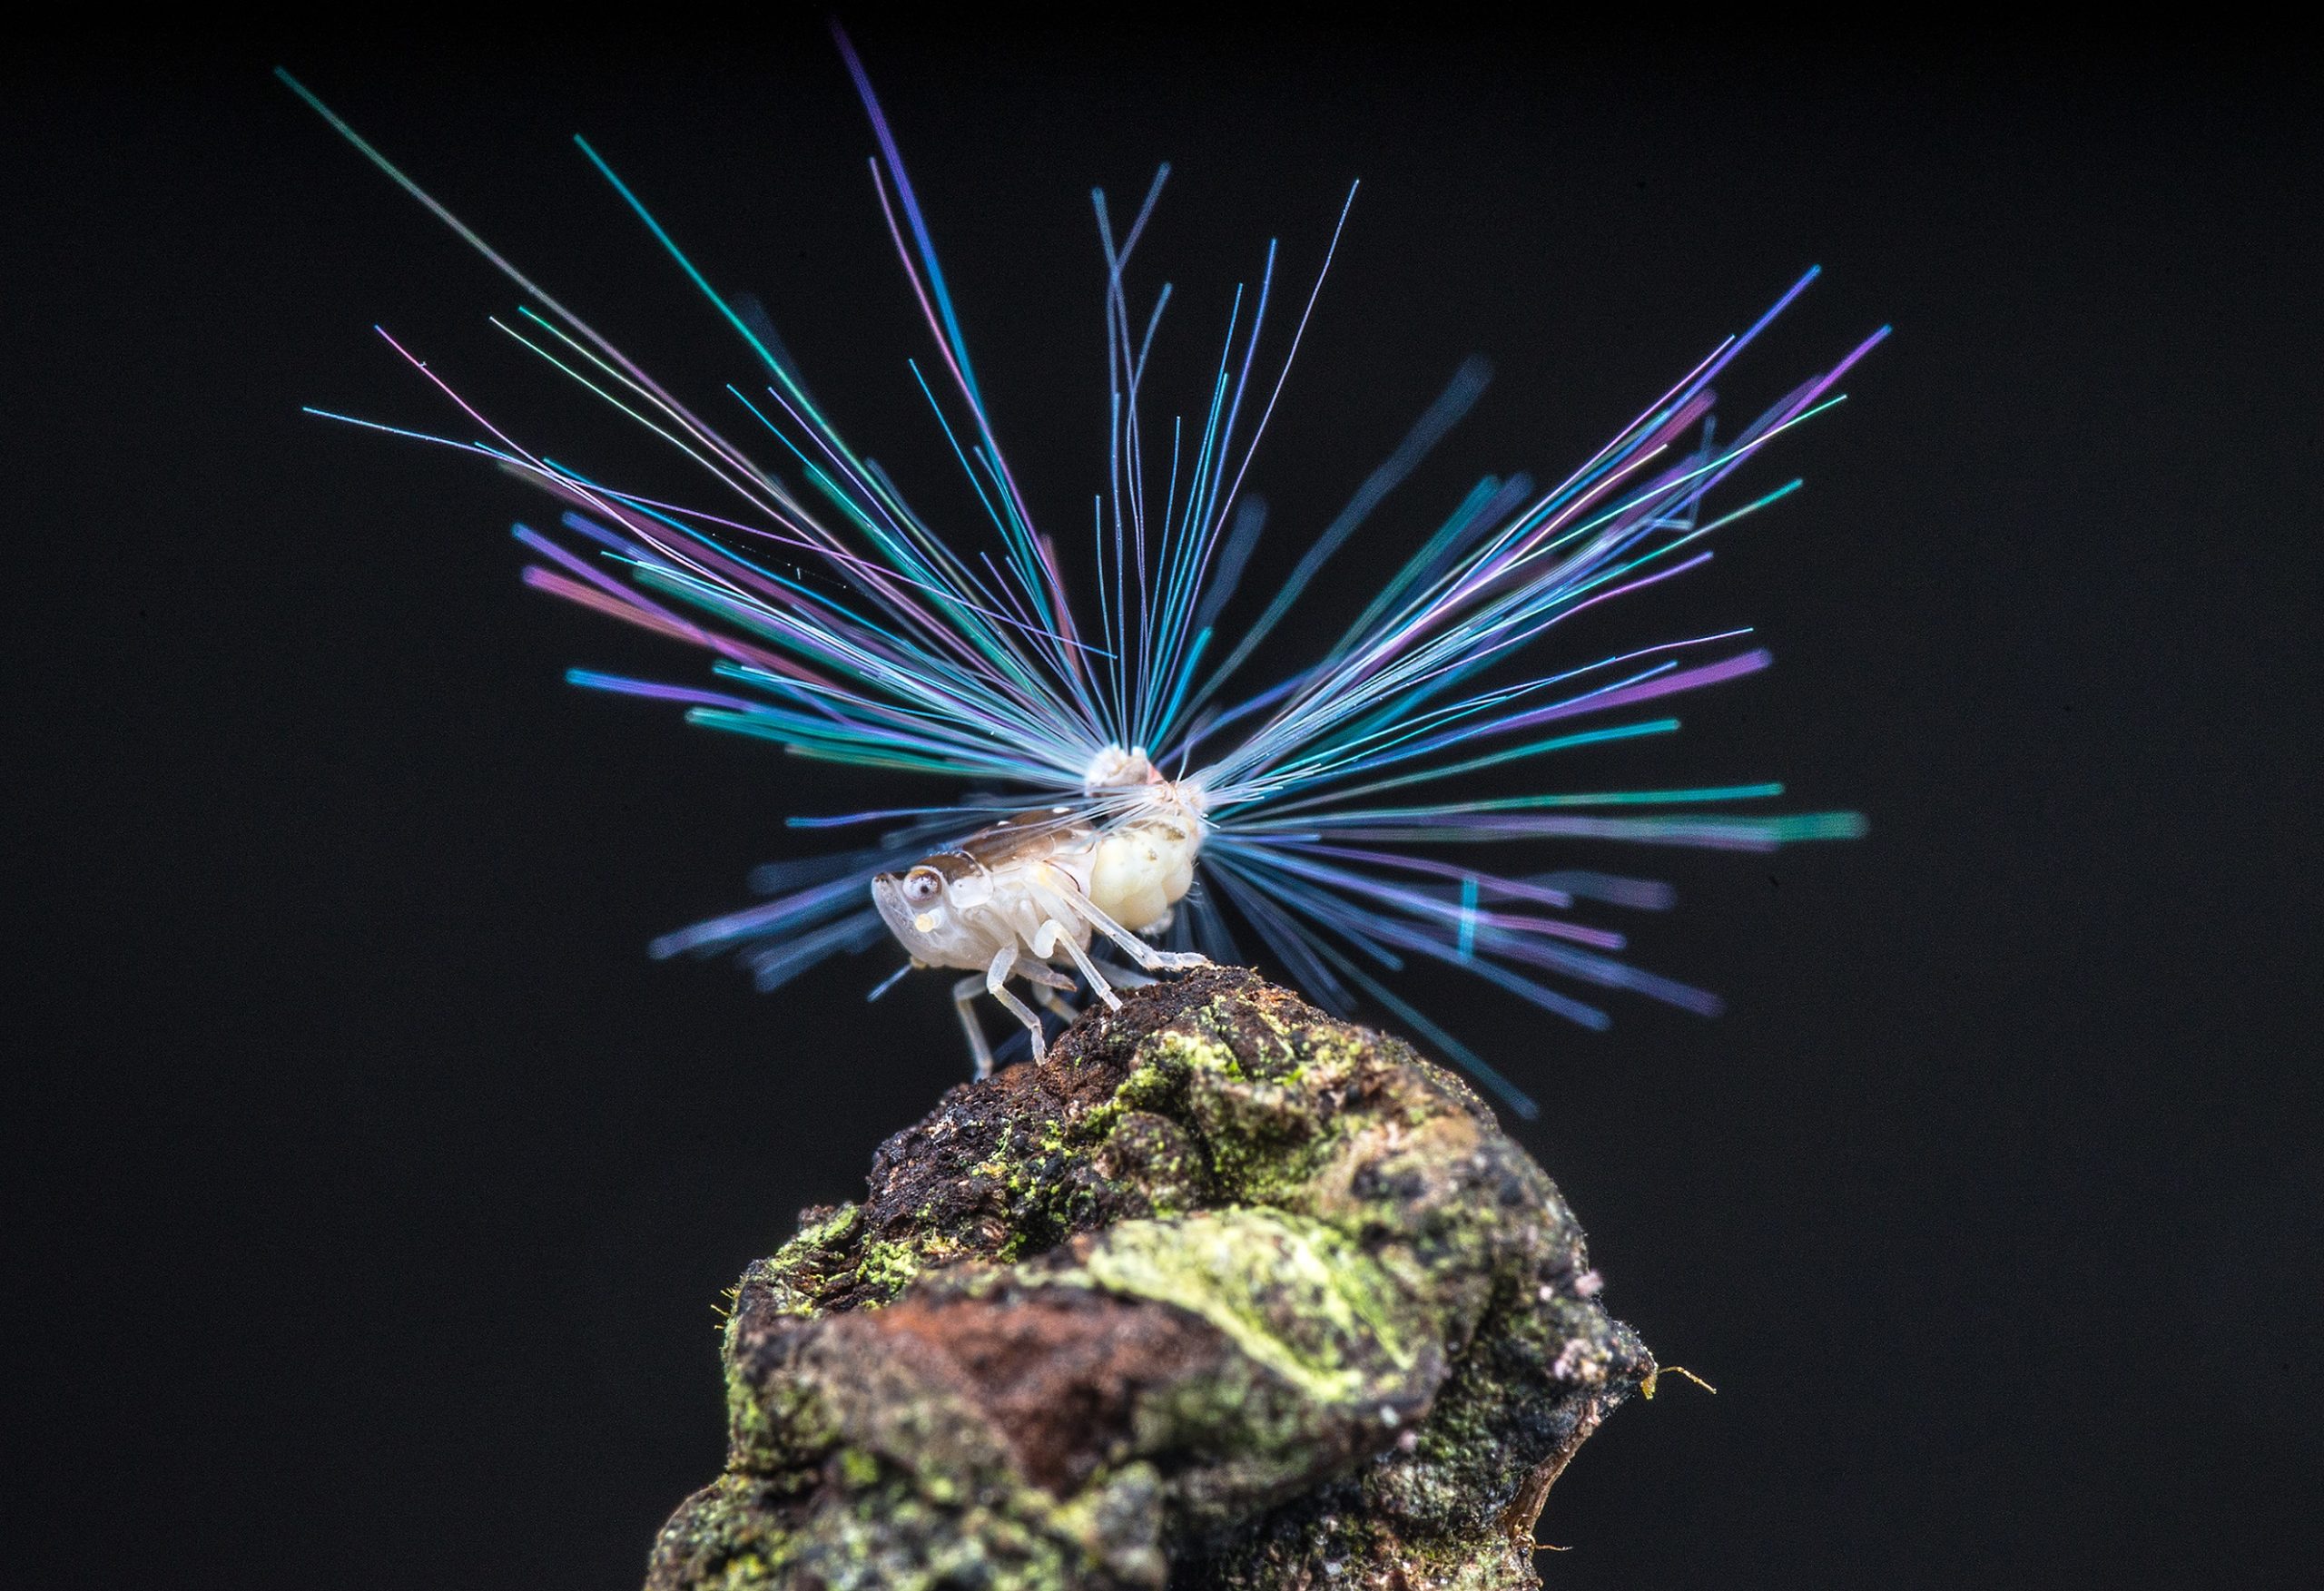 Planthopper nymph with 'fibre optic' tail